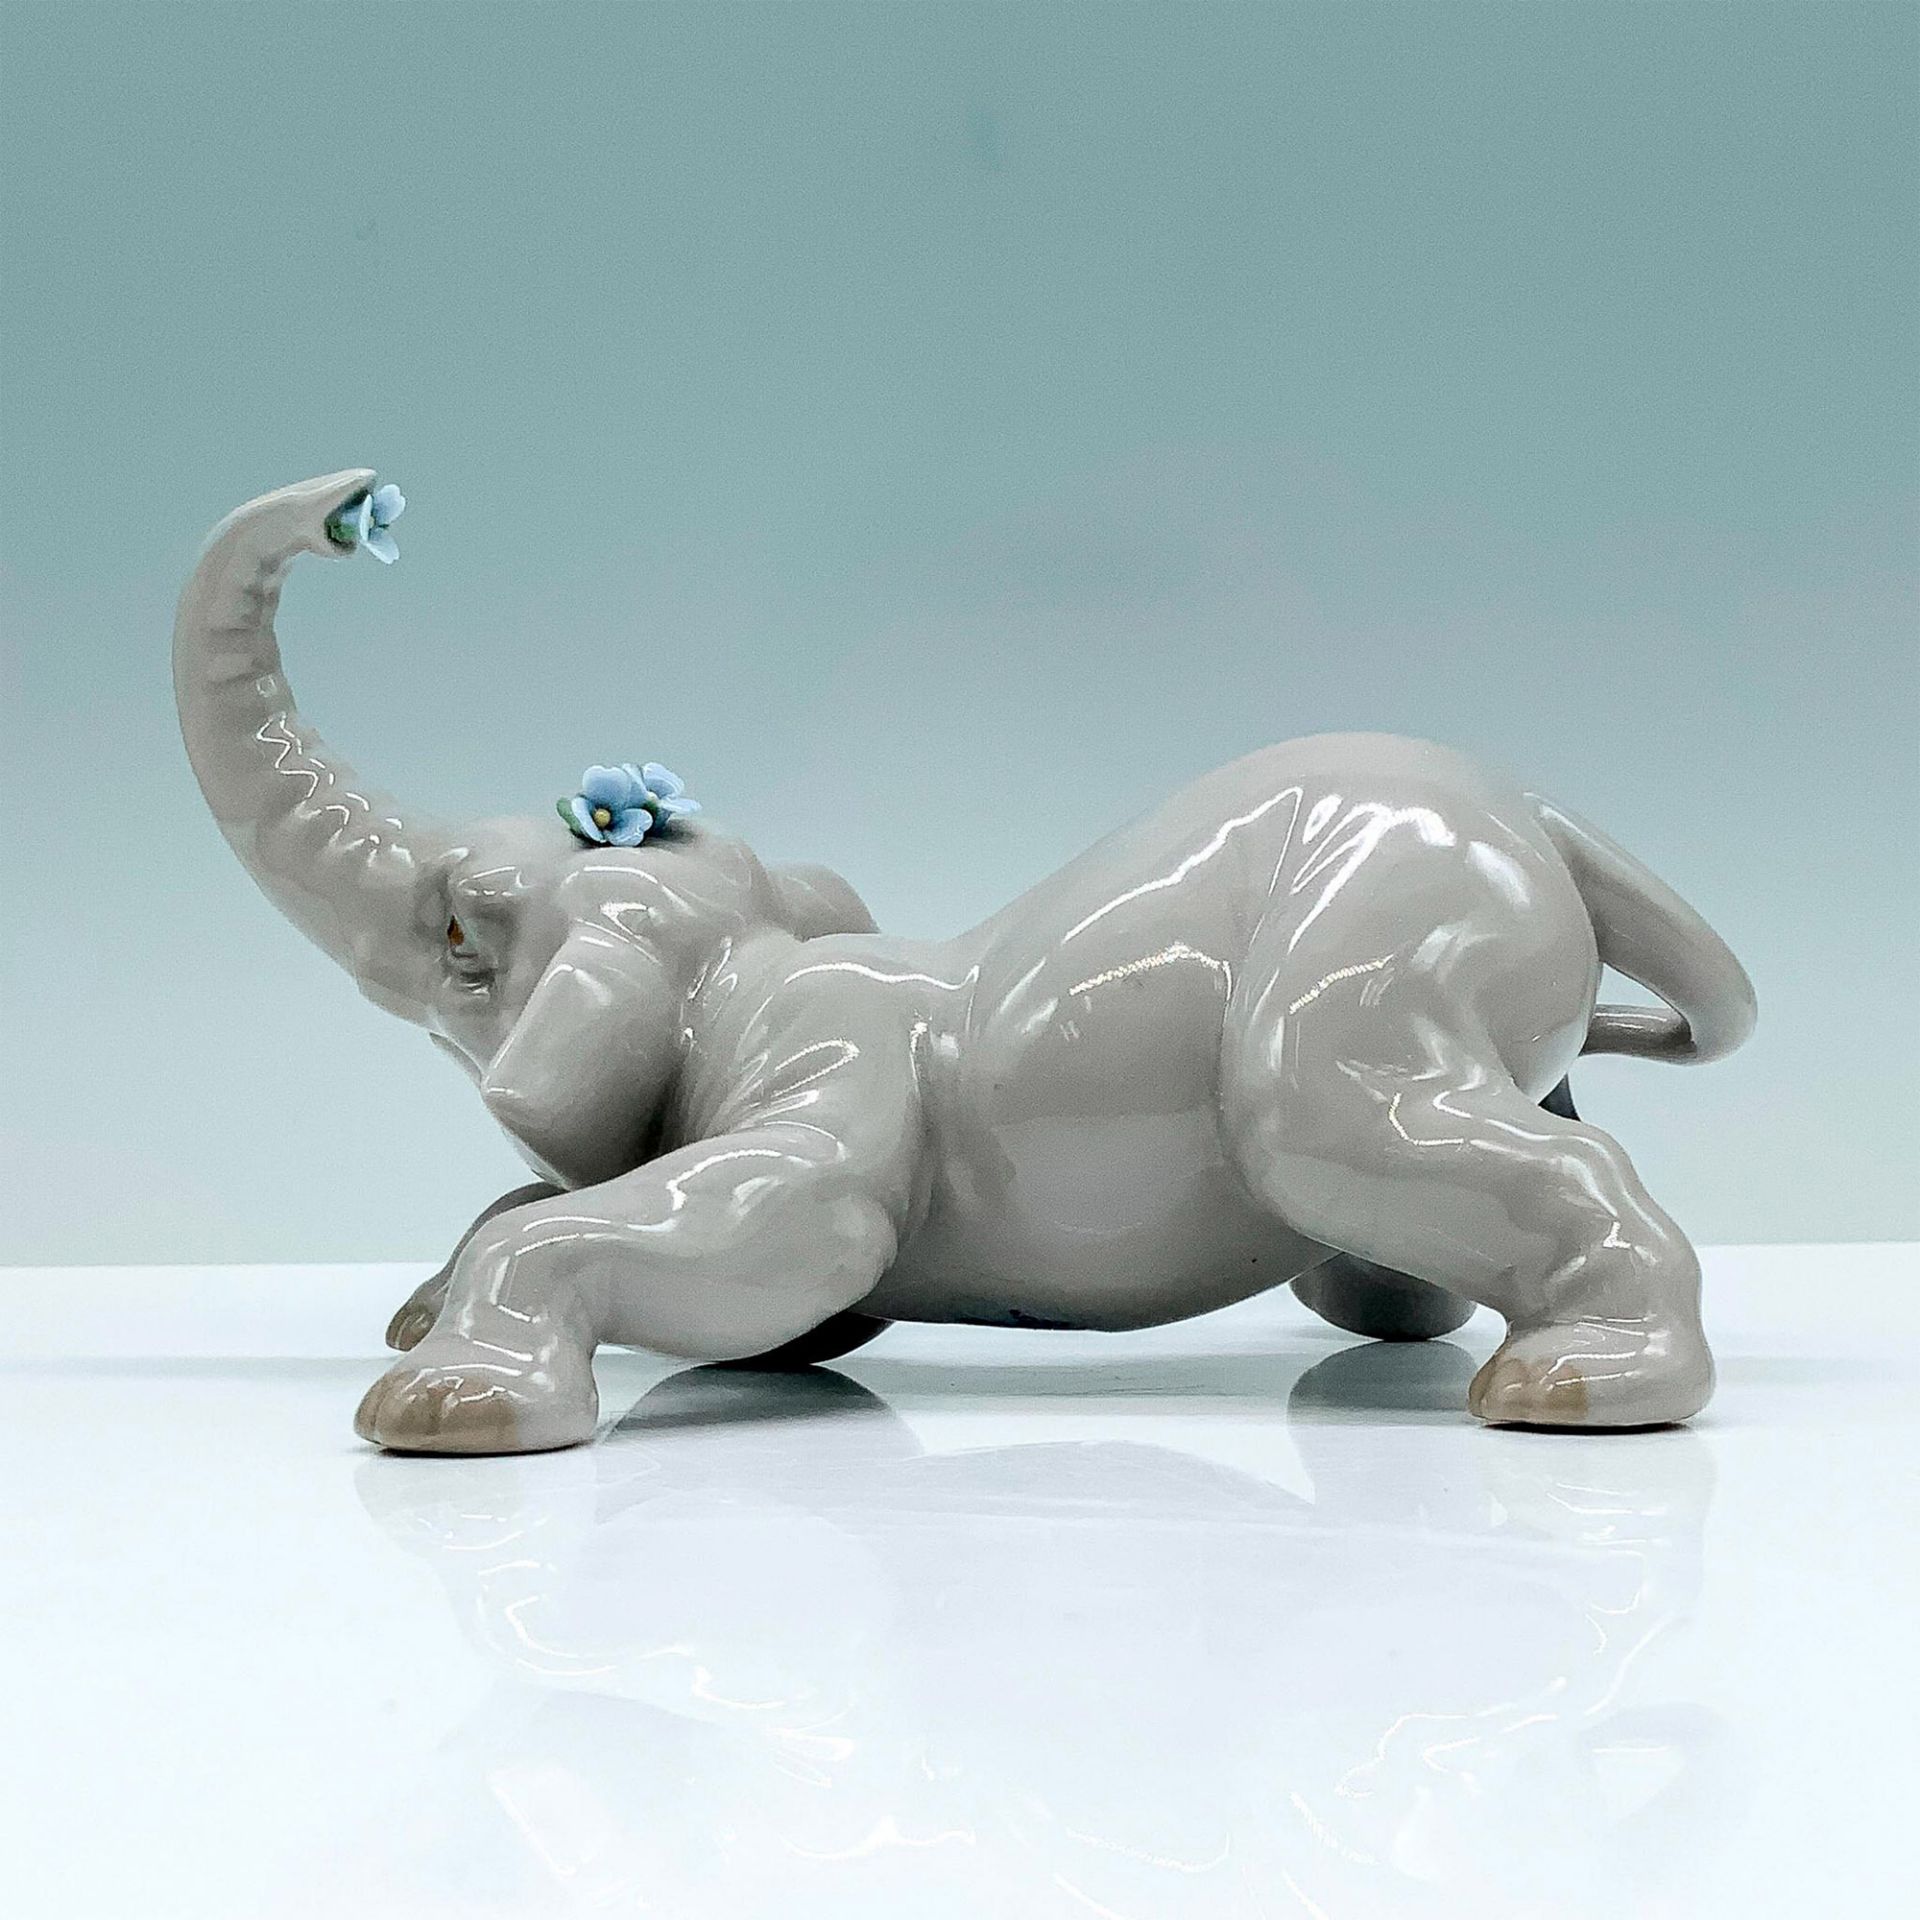 Baby Elephant With Blue Flower 1008490 - Lladro Porcelain Figurine - Image 2 of 3